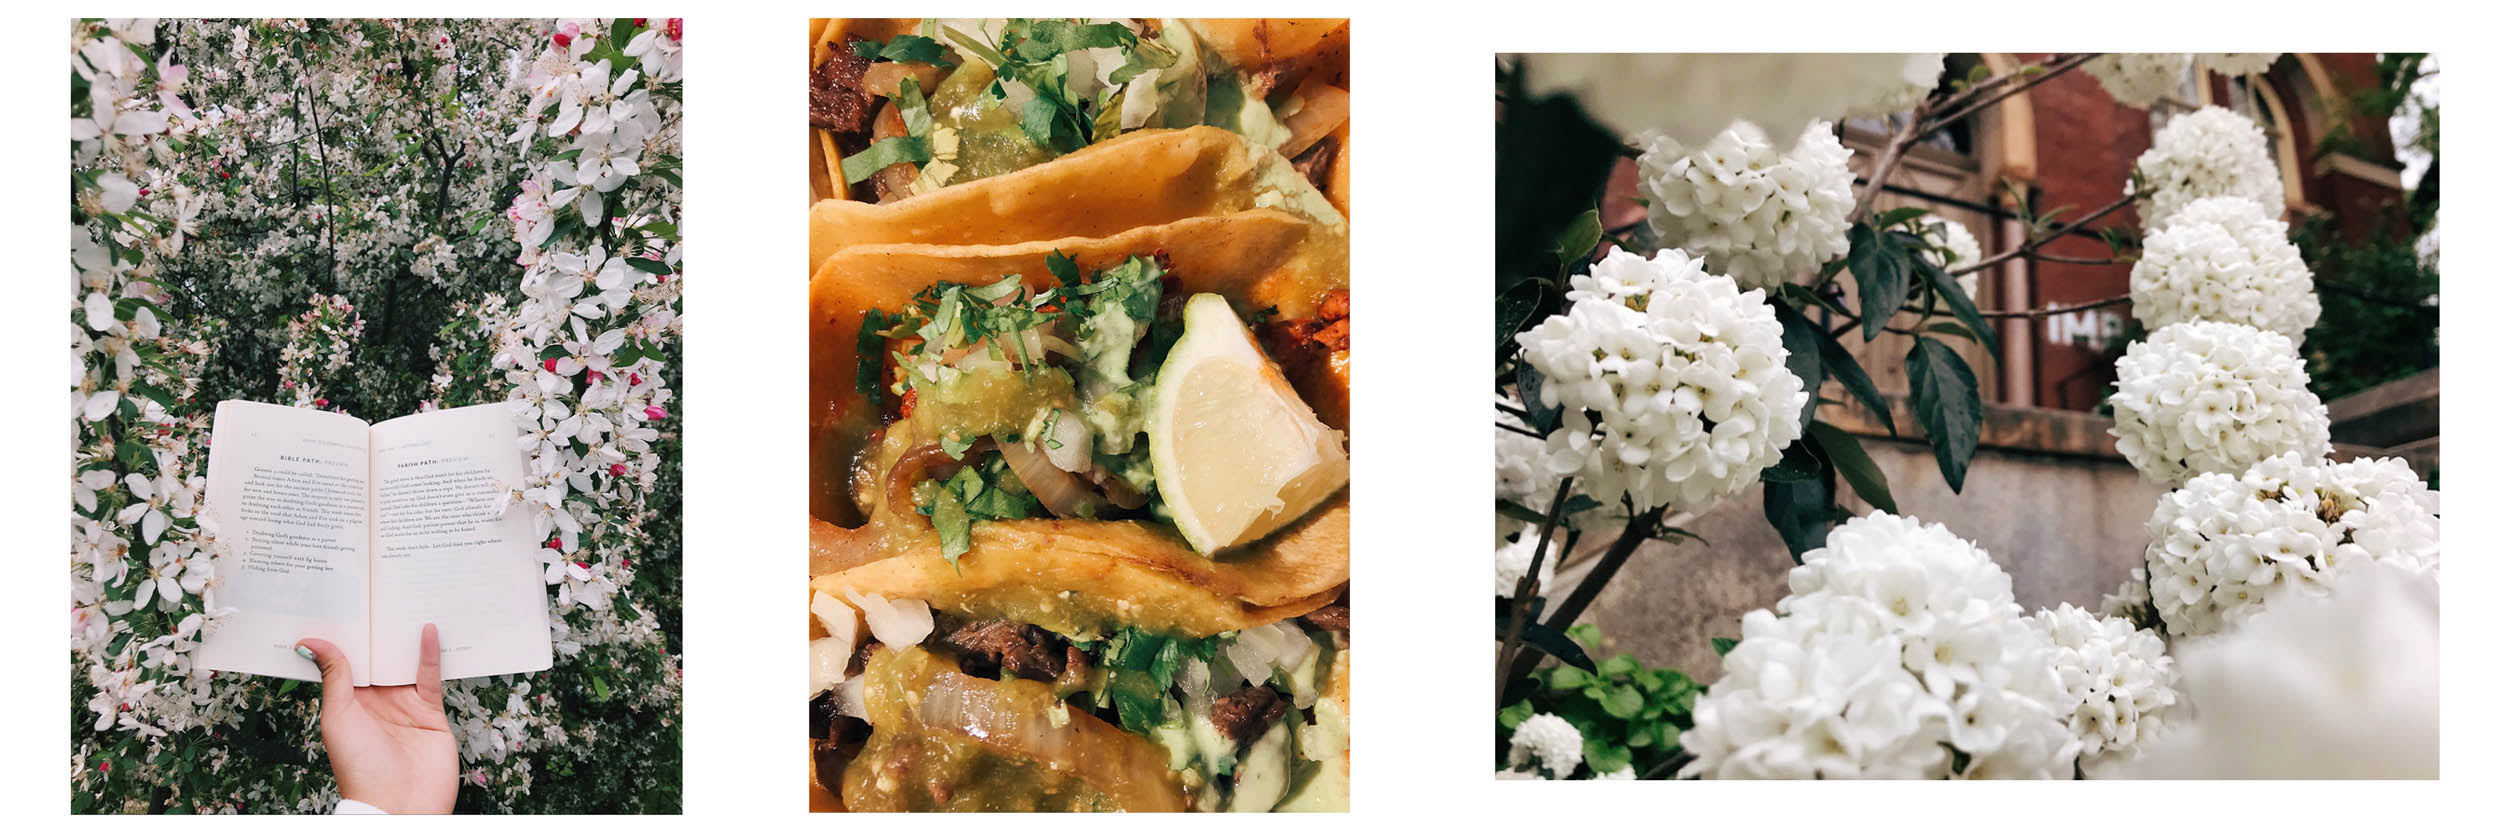 left, homemade street tacos, and white flowers, right